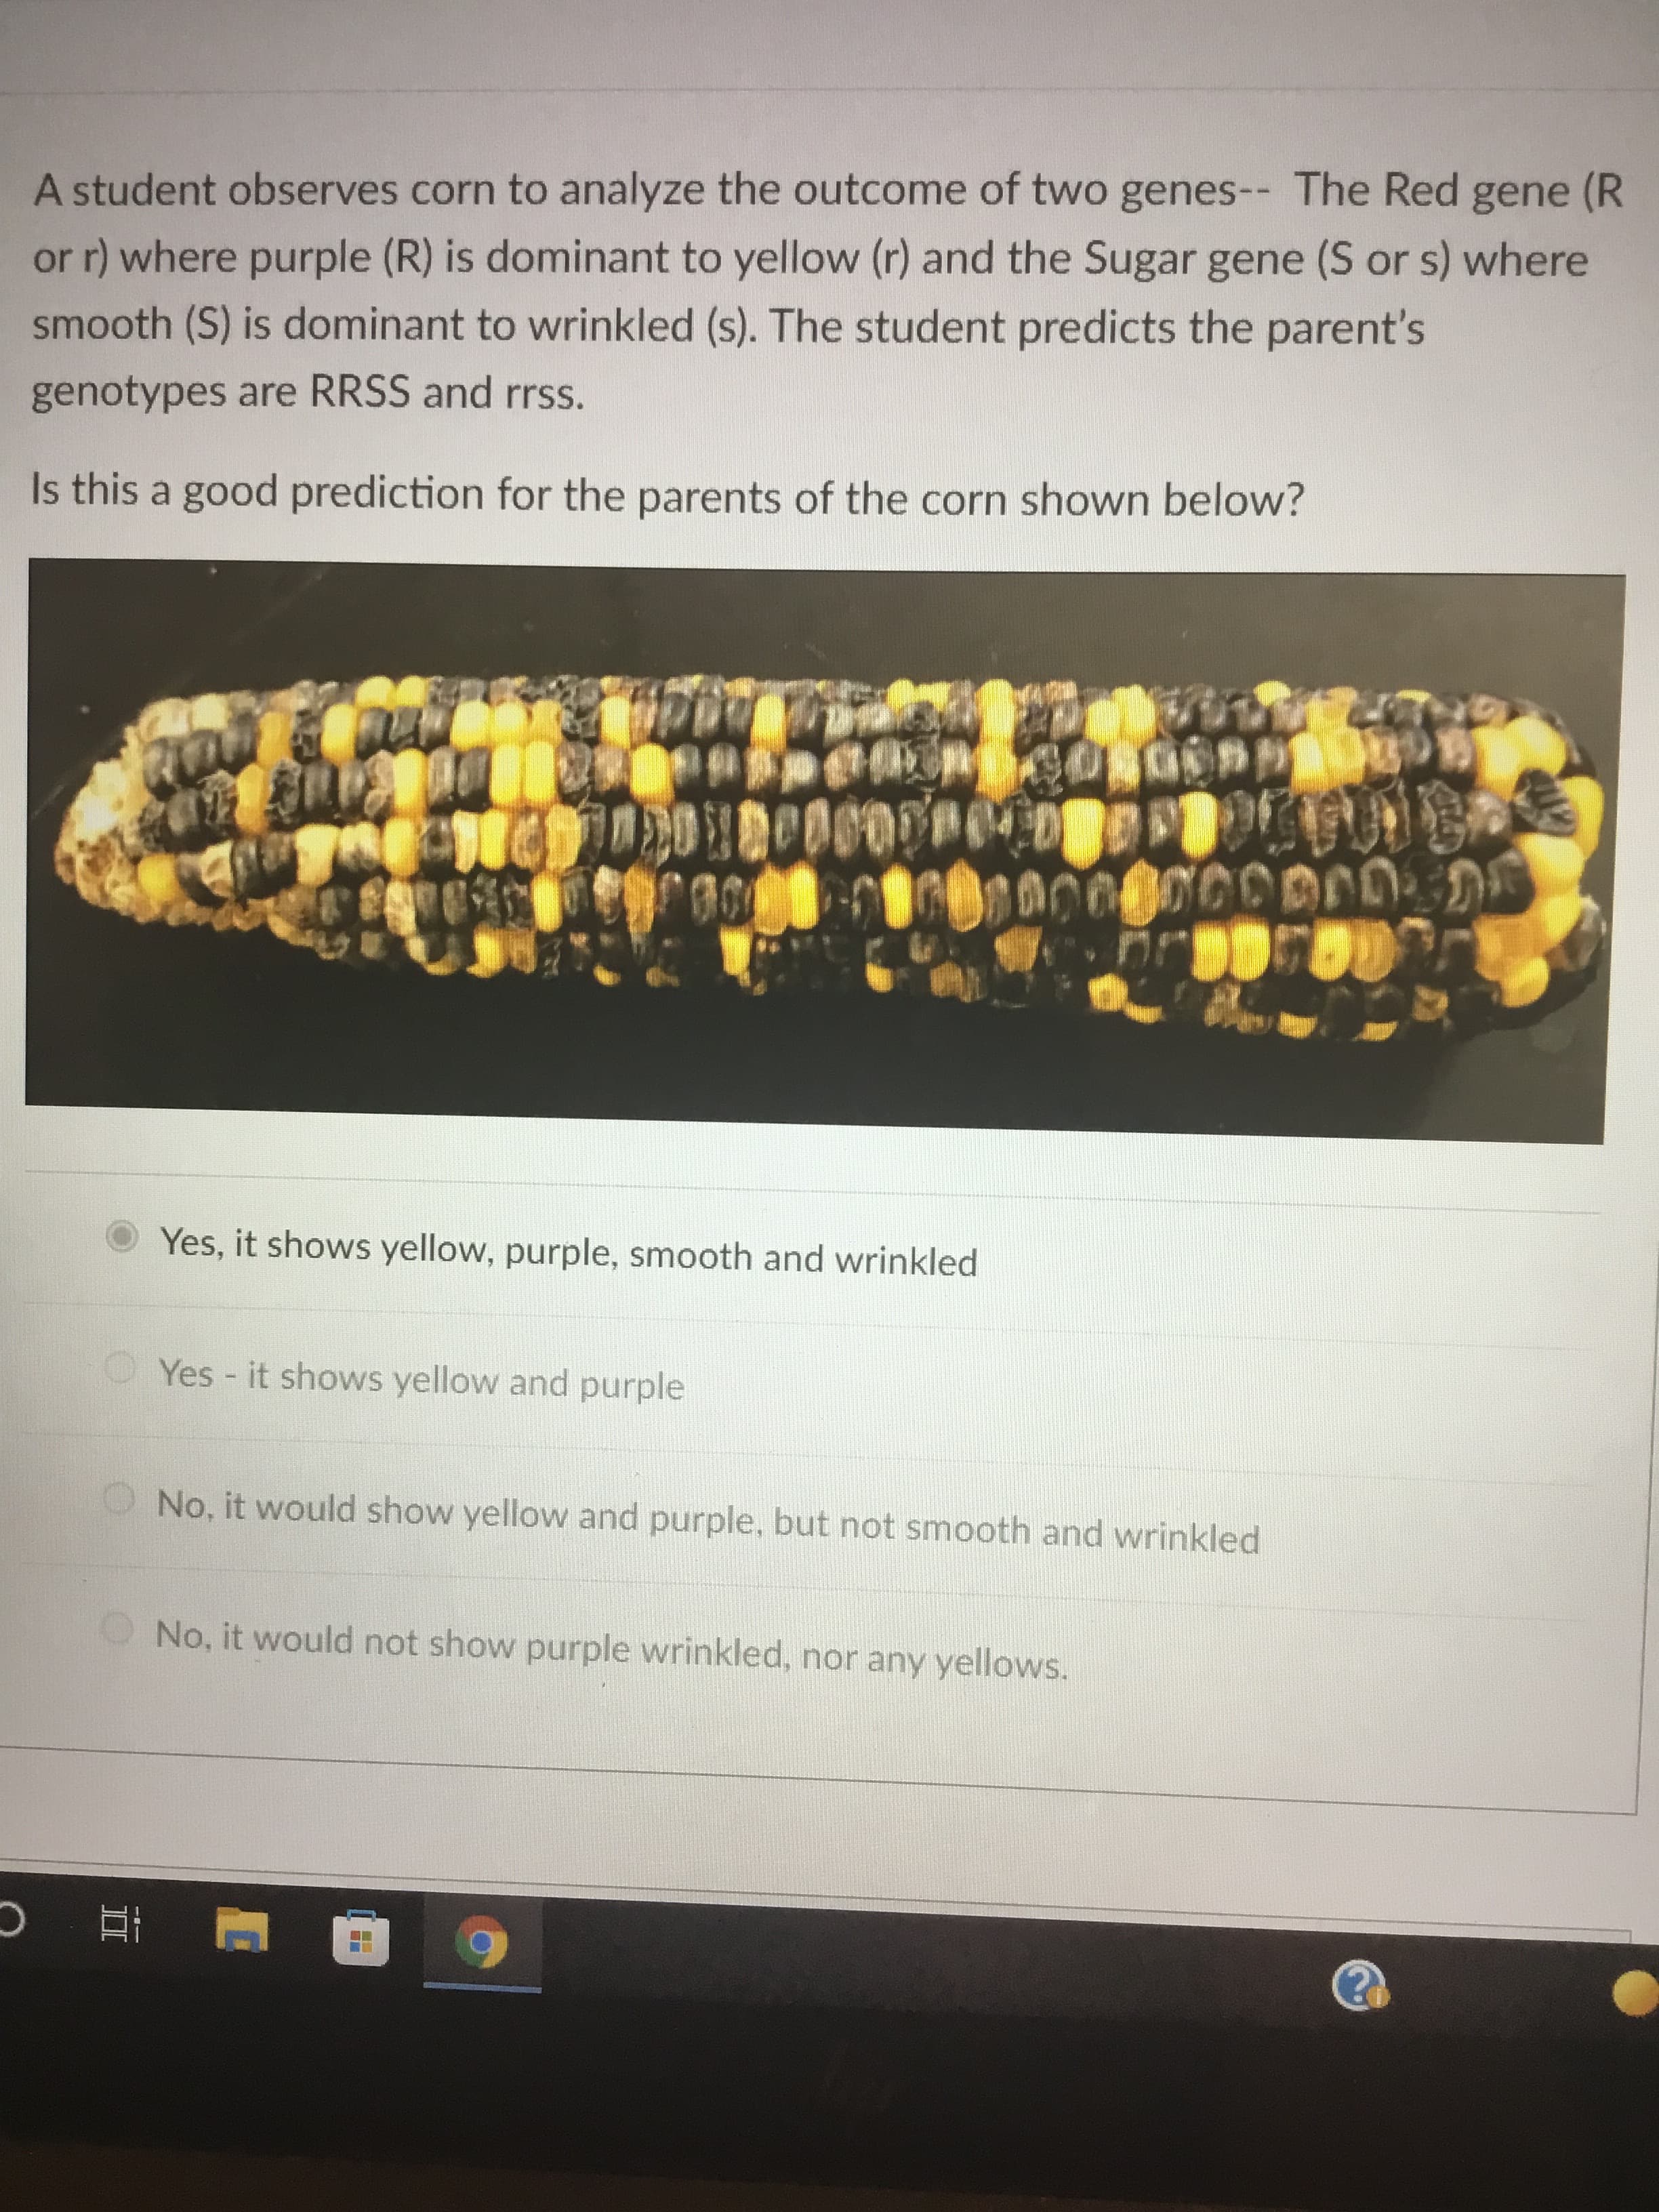 II
A student observes corn to analyze the outcome of two genes-- The Red gene (R
or r) where purple (R) is dominant to yellow (r) and the Sugar gene (S or s) where
smooth (S) is dominant to wrinkled (s). The student predicts the parent's
genotypes are RRSS and rrss.
Is this a good prediction for the parents of the corn shown below?
Yes, it shows yellow, purple, smooth and wrinkled
OYes - it shows yellow and purple
No, it would show yellow and purple, but not smooth and wrinkled
No, it would not show purple wrinkled, nor any yellows.
